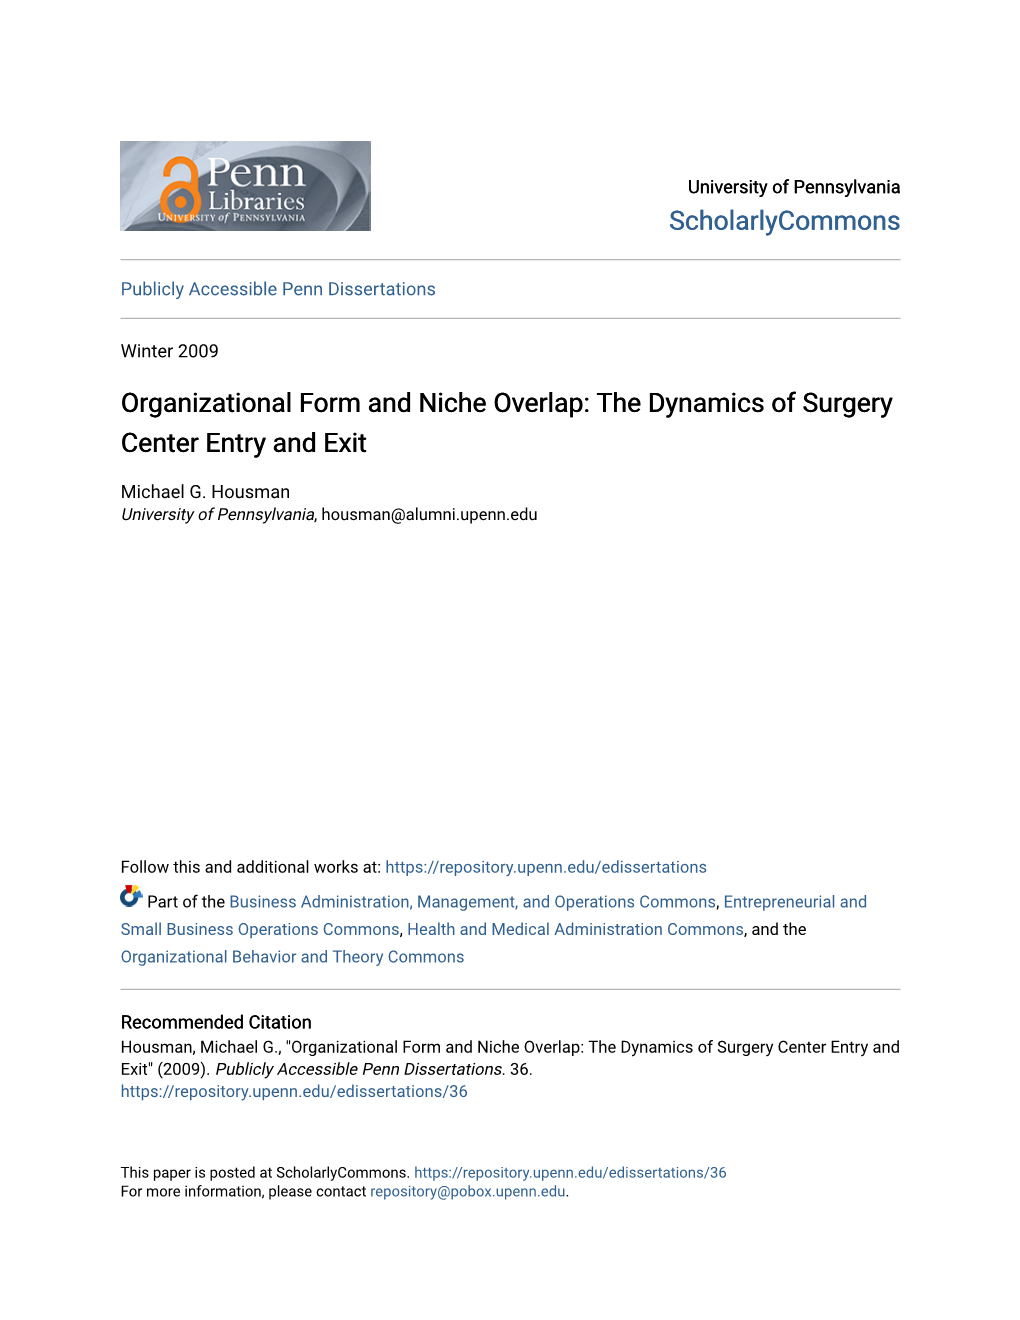 Organizational Form and Niche Overlap: the Dynamics of Surgery Center Entry and Exit